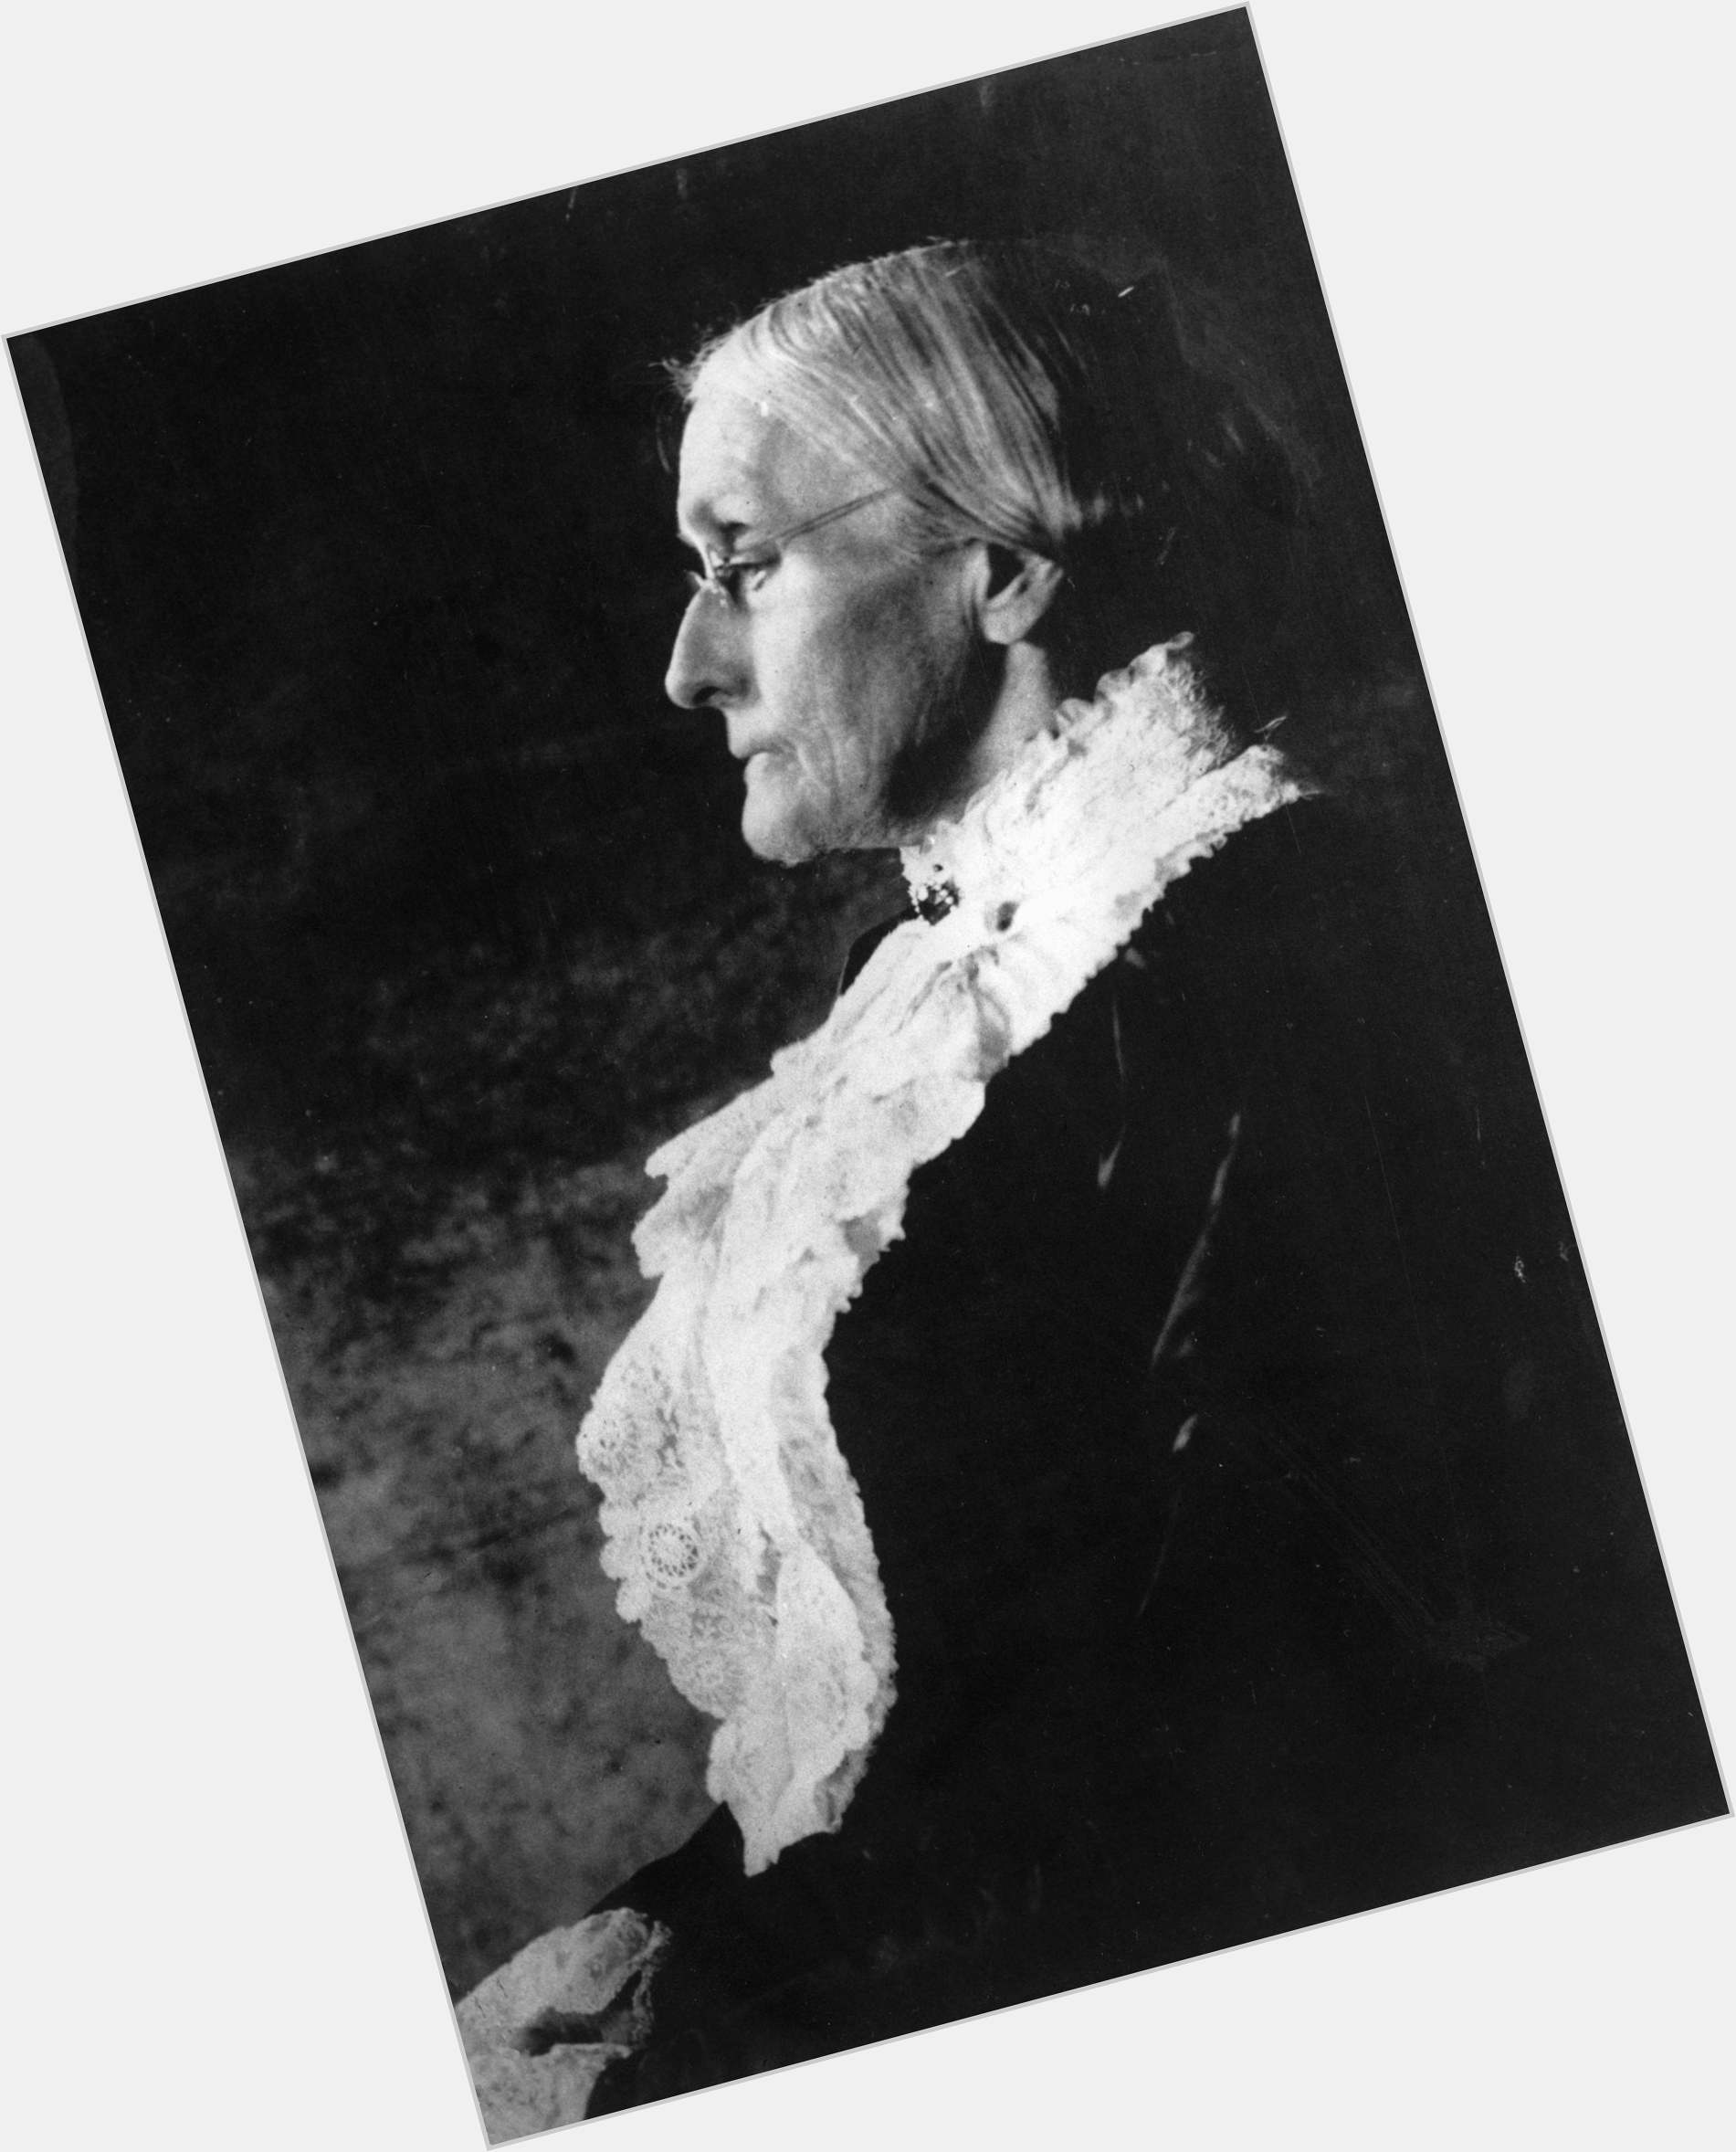 Susan B Anthony exclusive hot pic 4.jpg